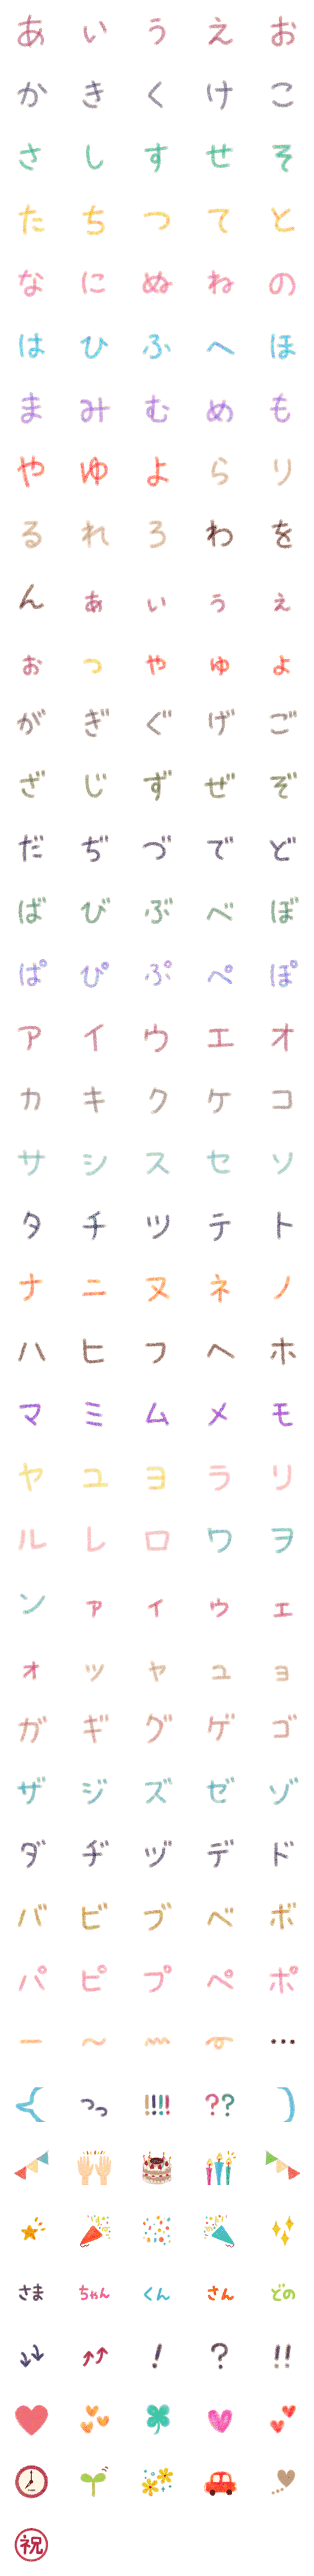 [LINE絵文字]＼✨日常＆お祝いにも使えるデコ文字✨／の画像一覧